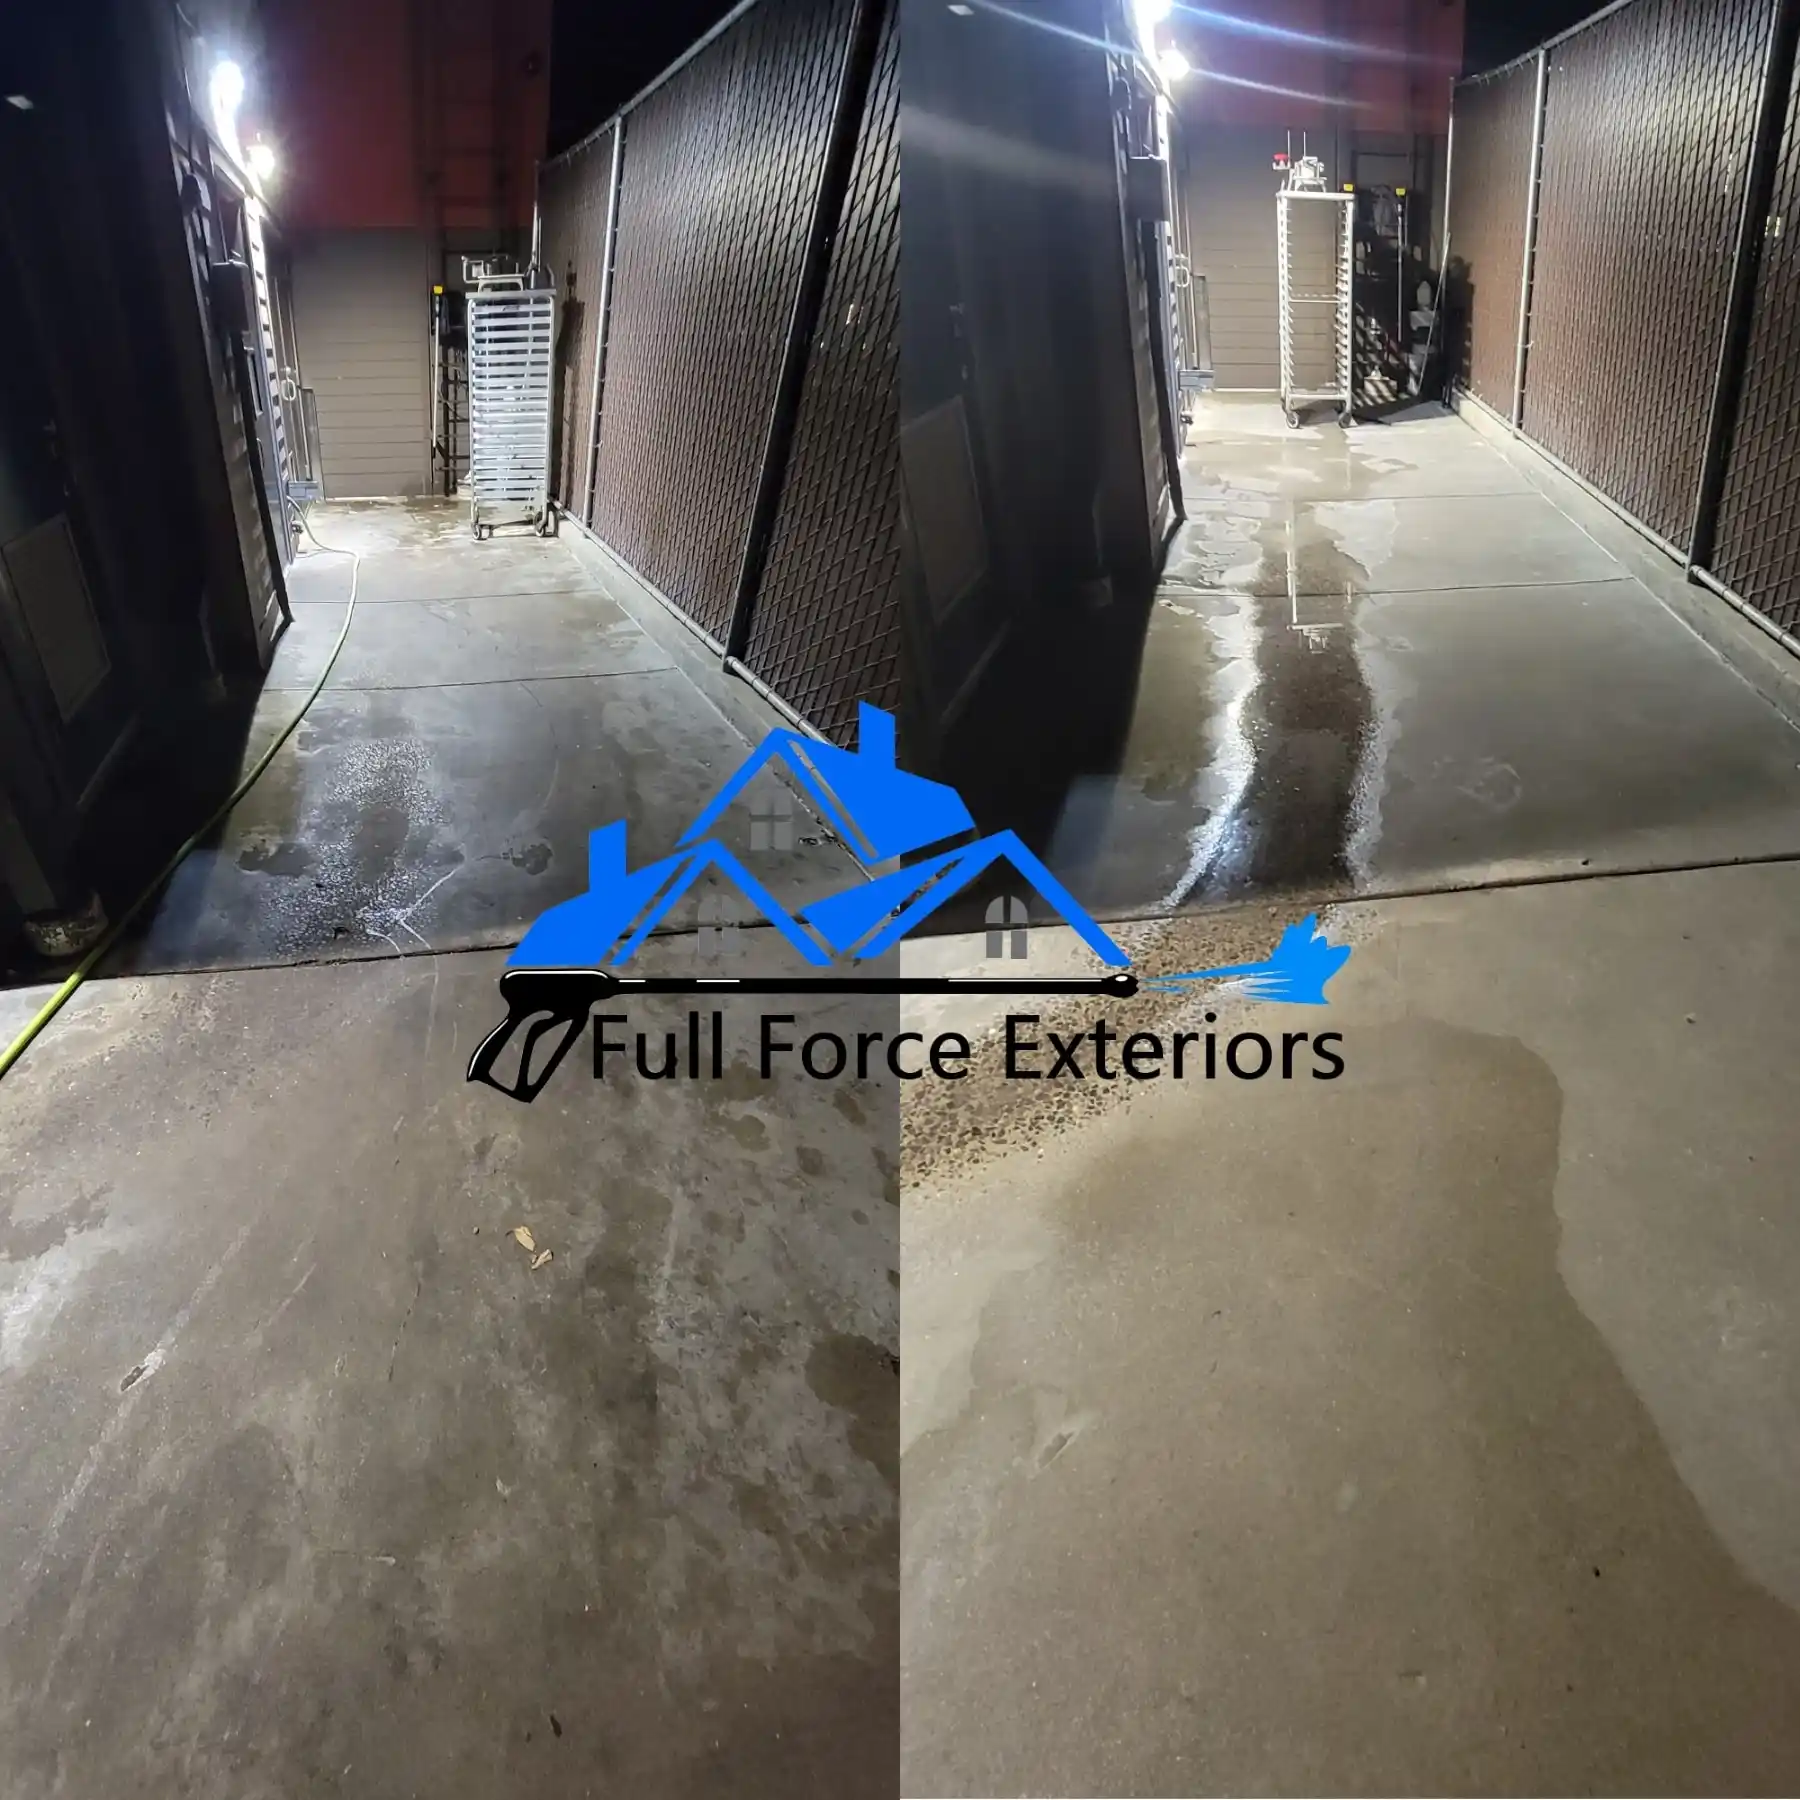 Pressure Washing for Full Force Exteriors in Russellville, AR